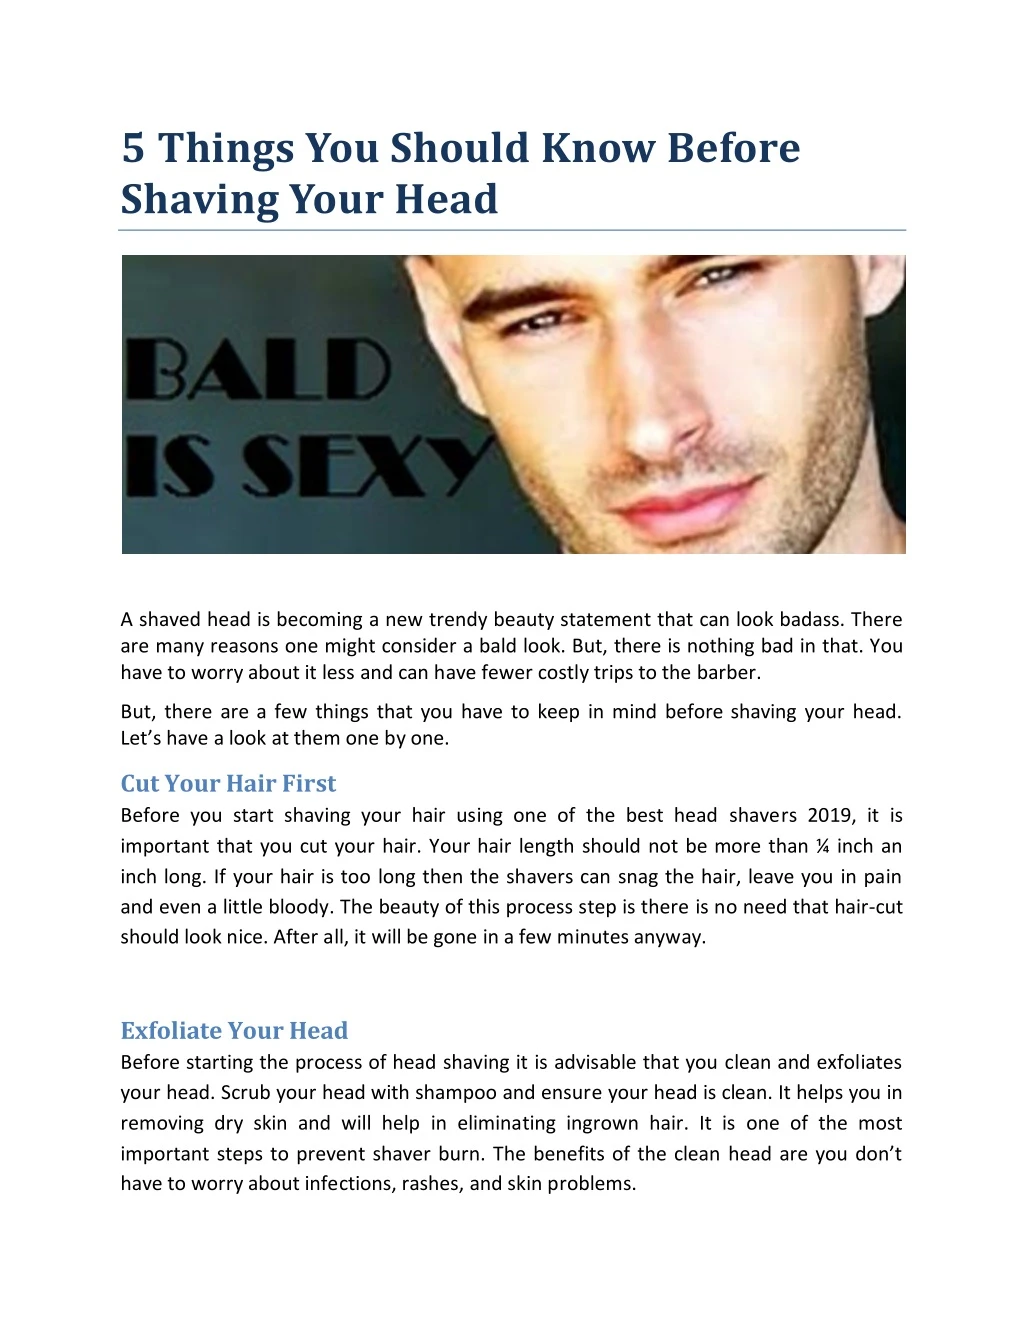 5 things you should know before shaving your head